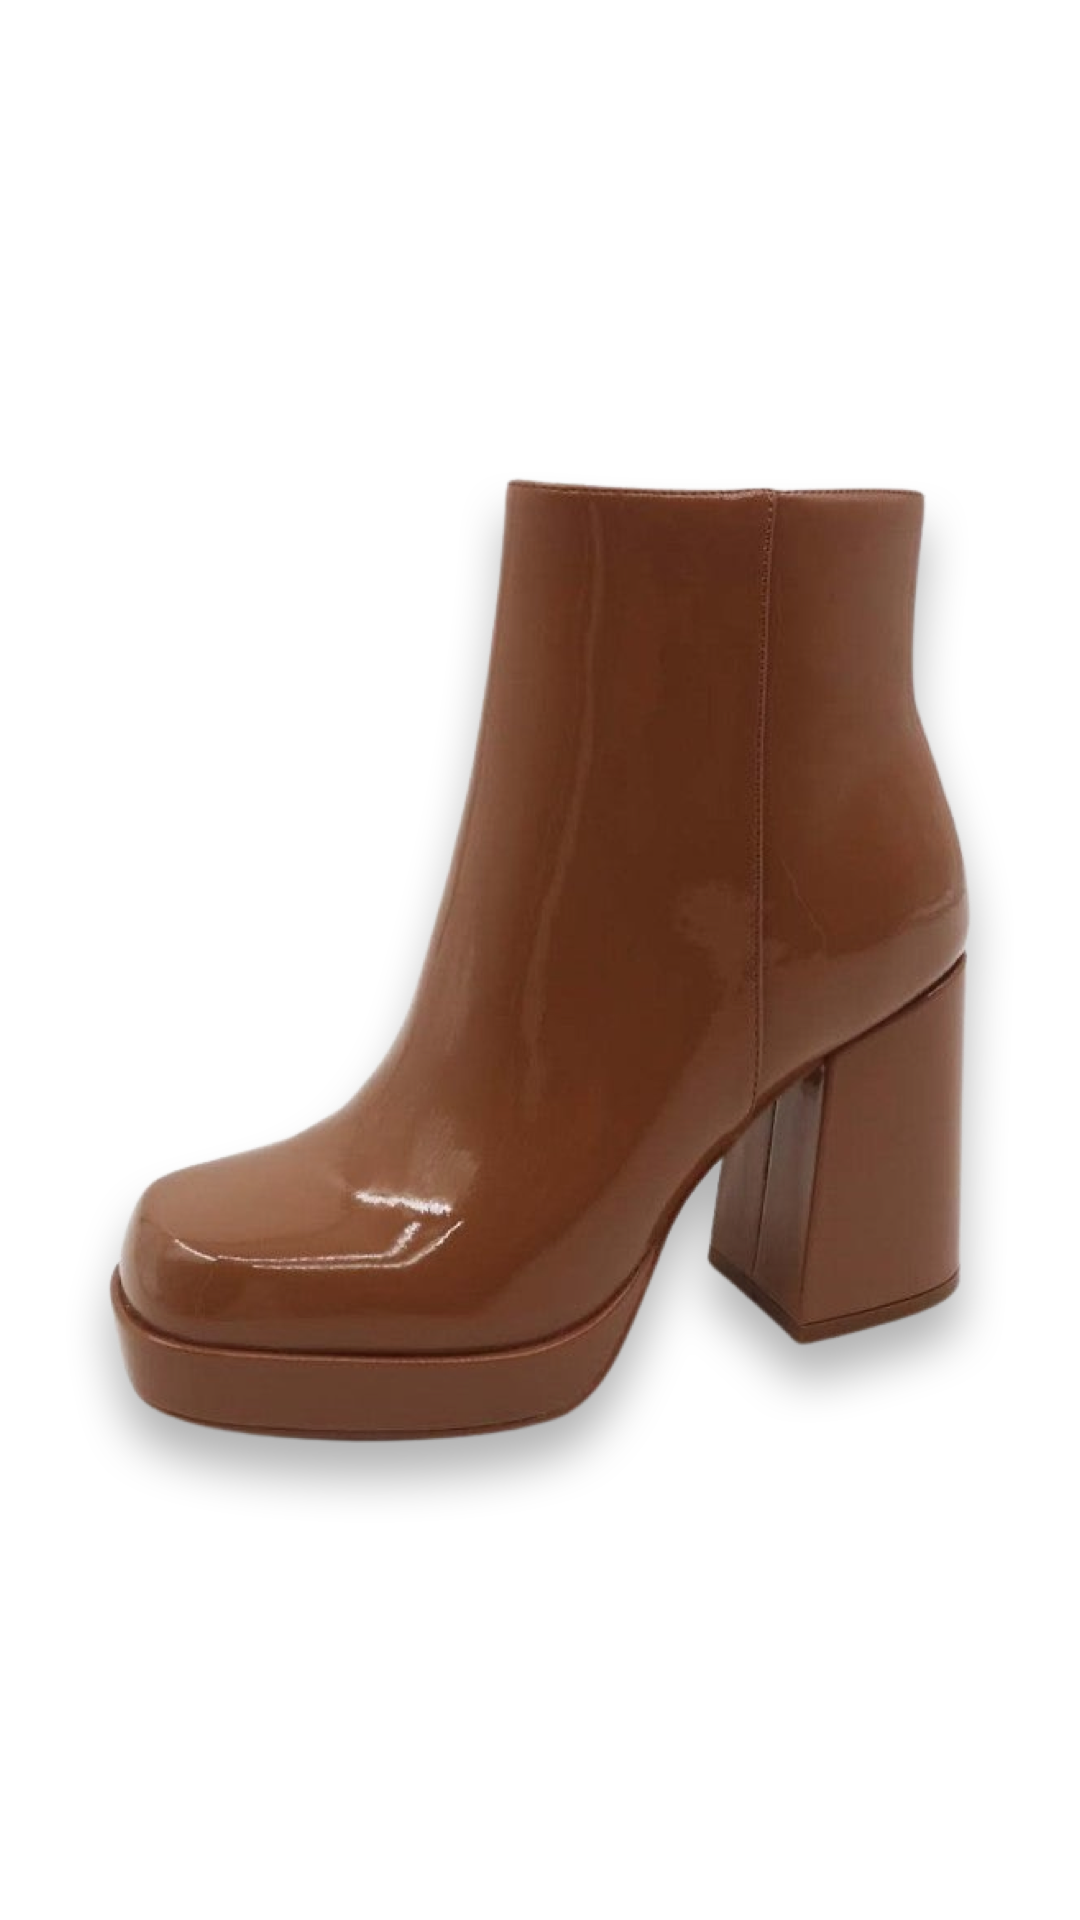 Camel Patent Leather Booties